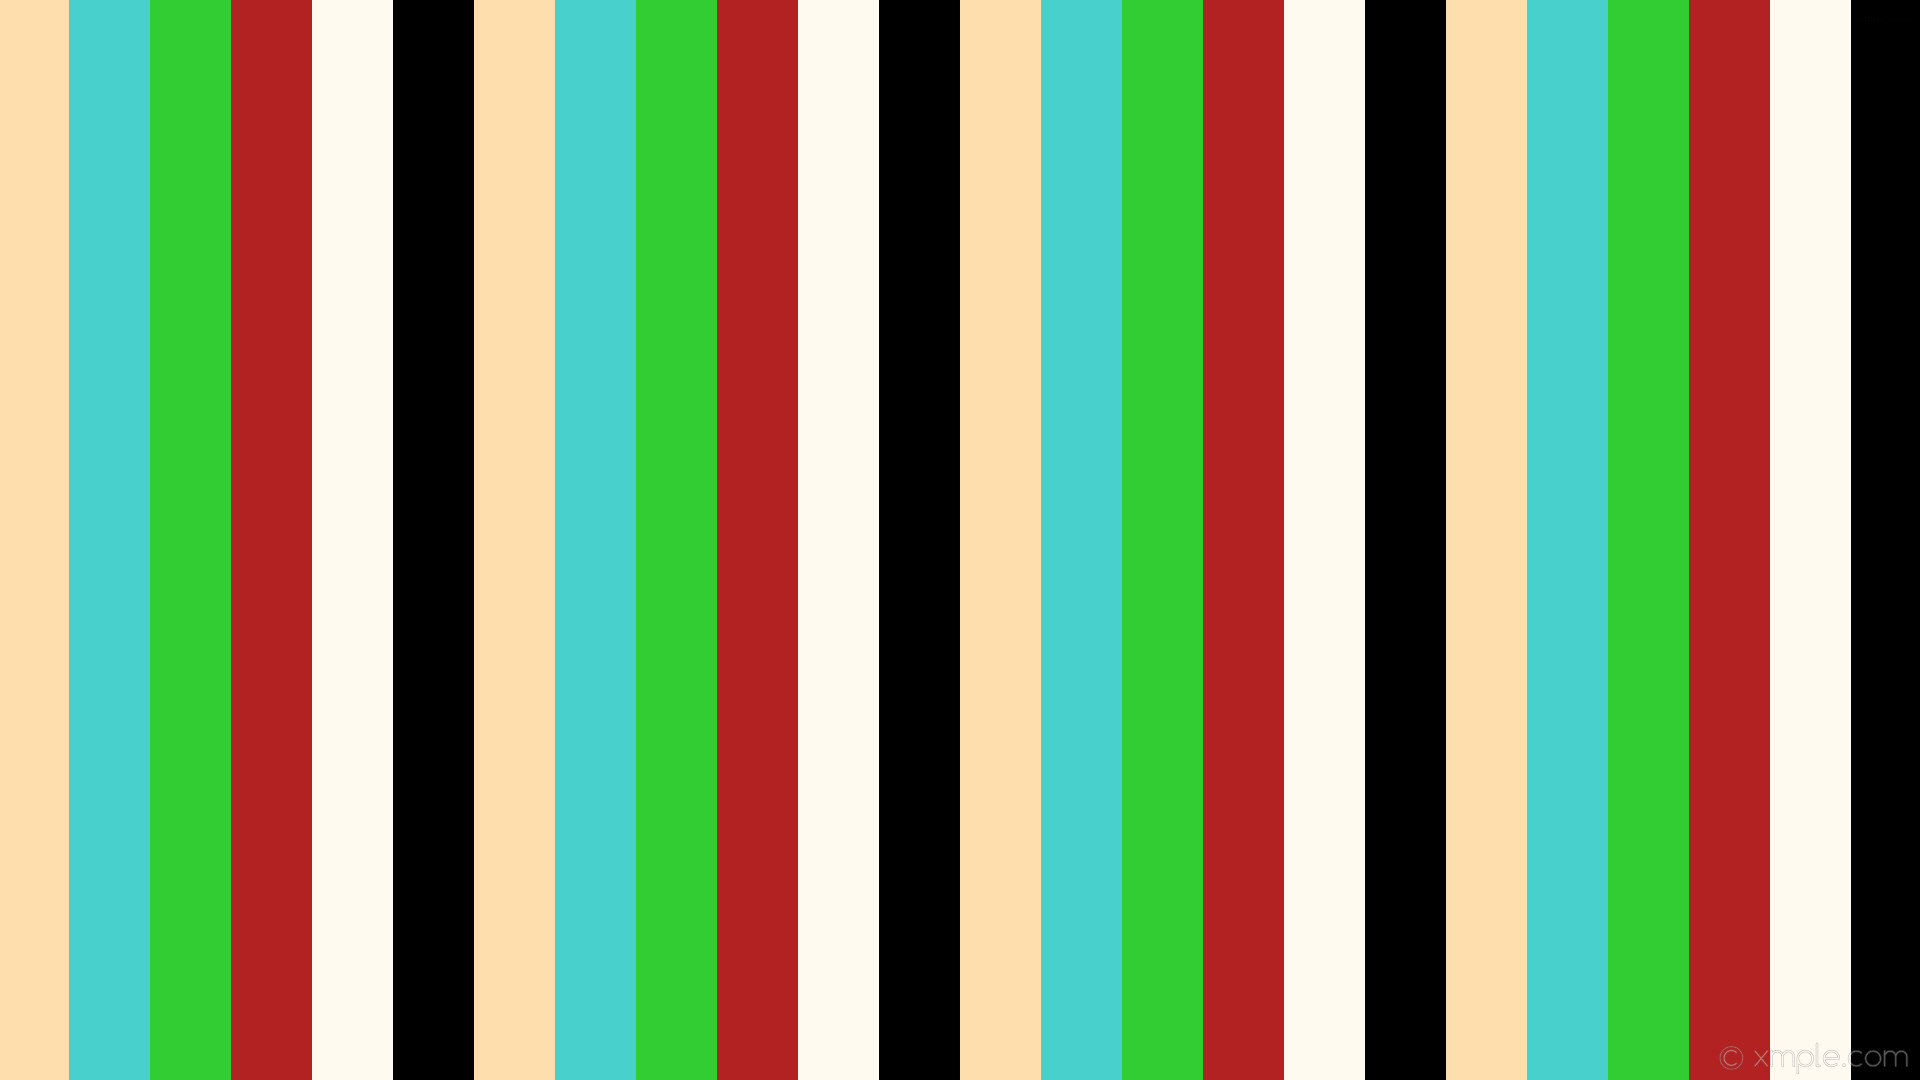 1920x1080 wallpaper black red brown blue stripes green streaks white lines floral  white fire brick lime green